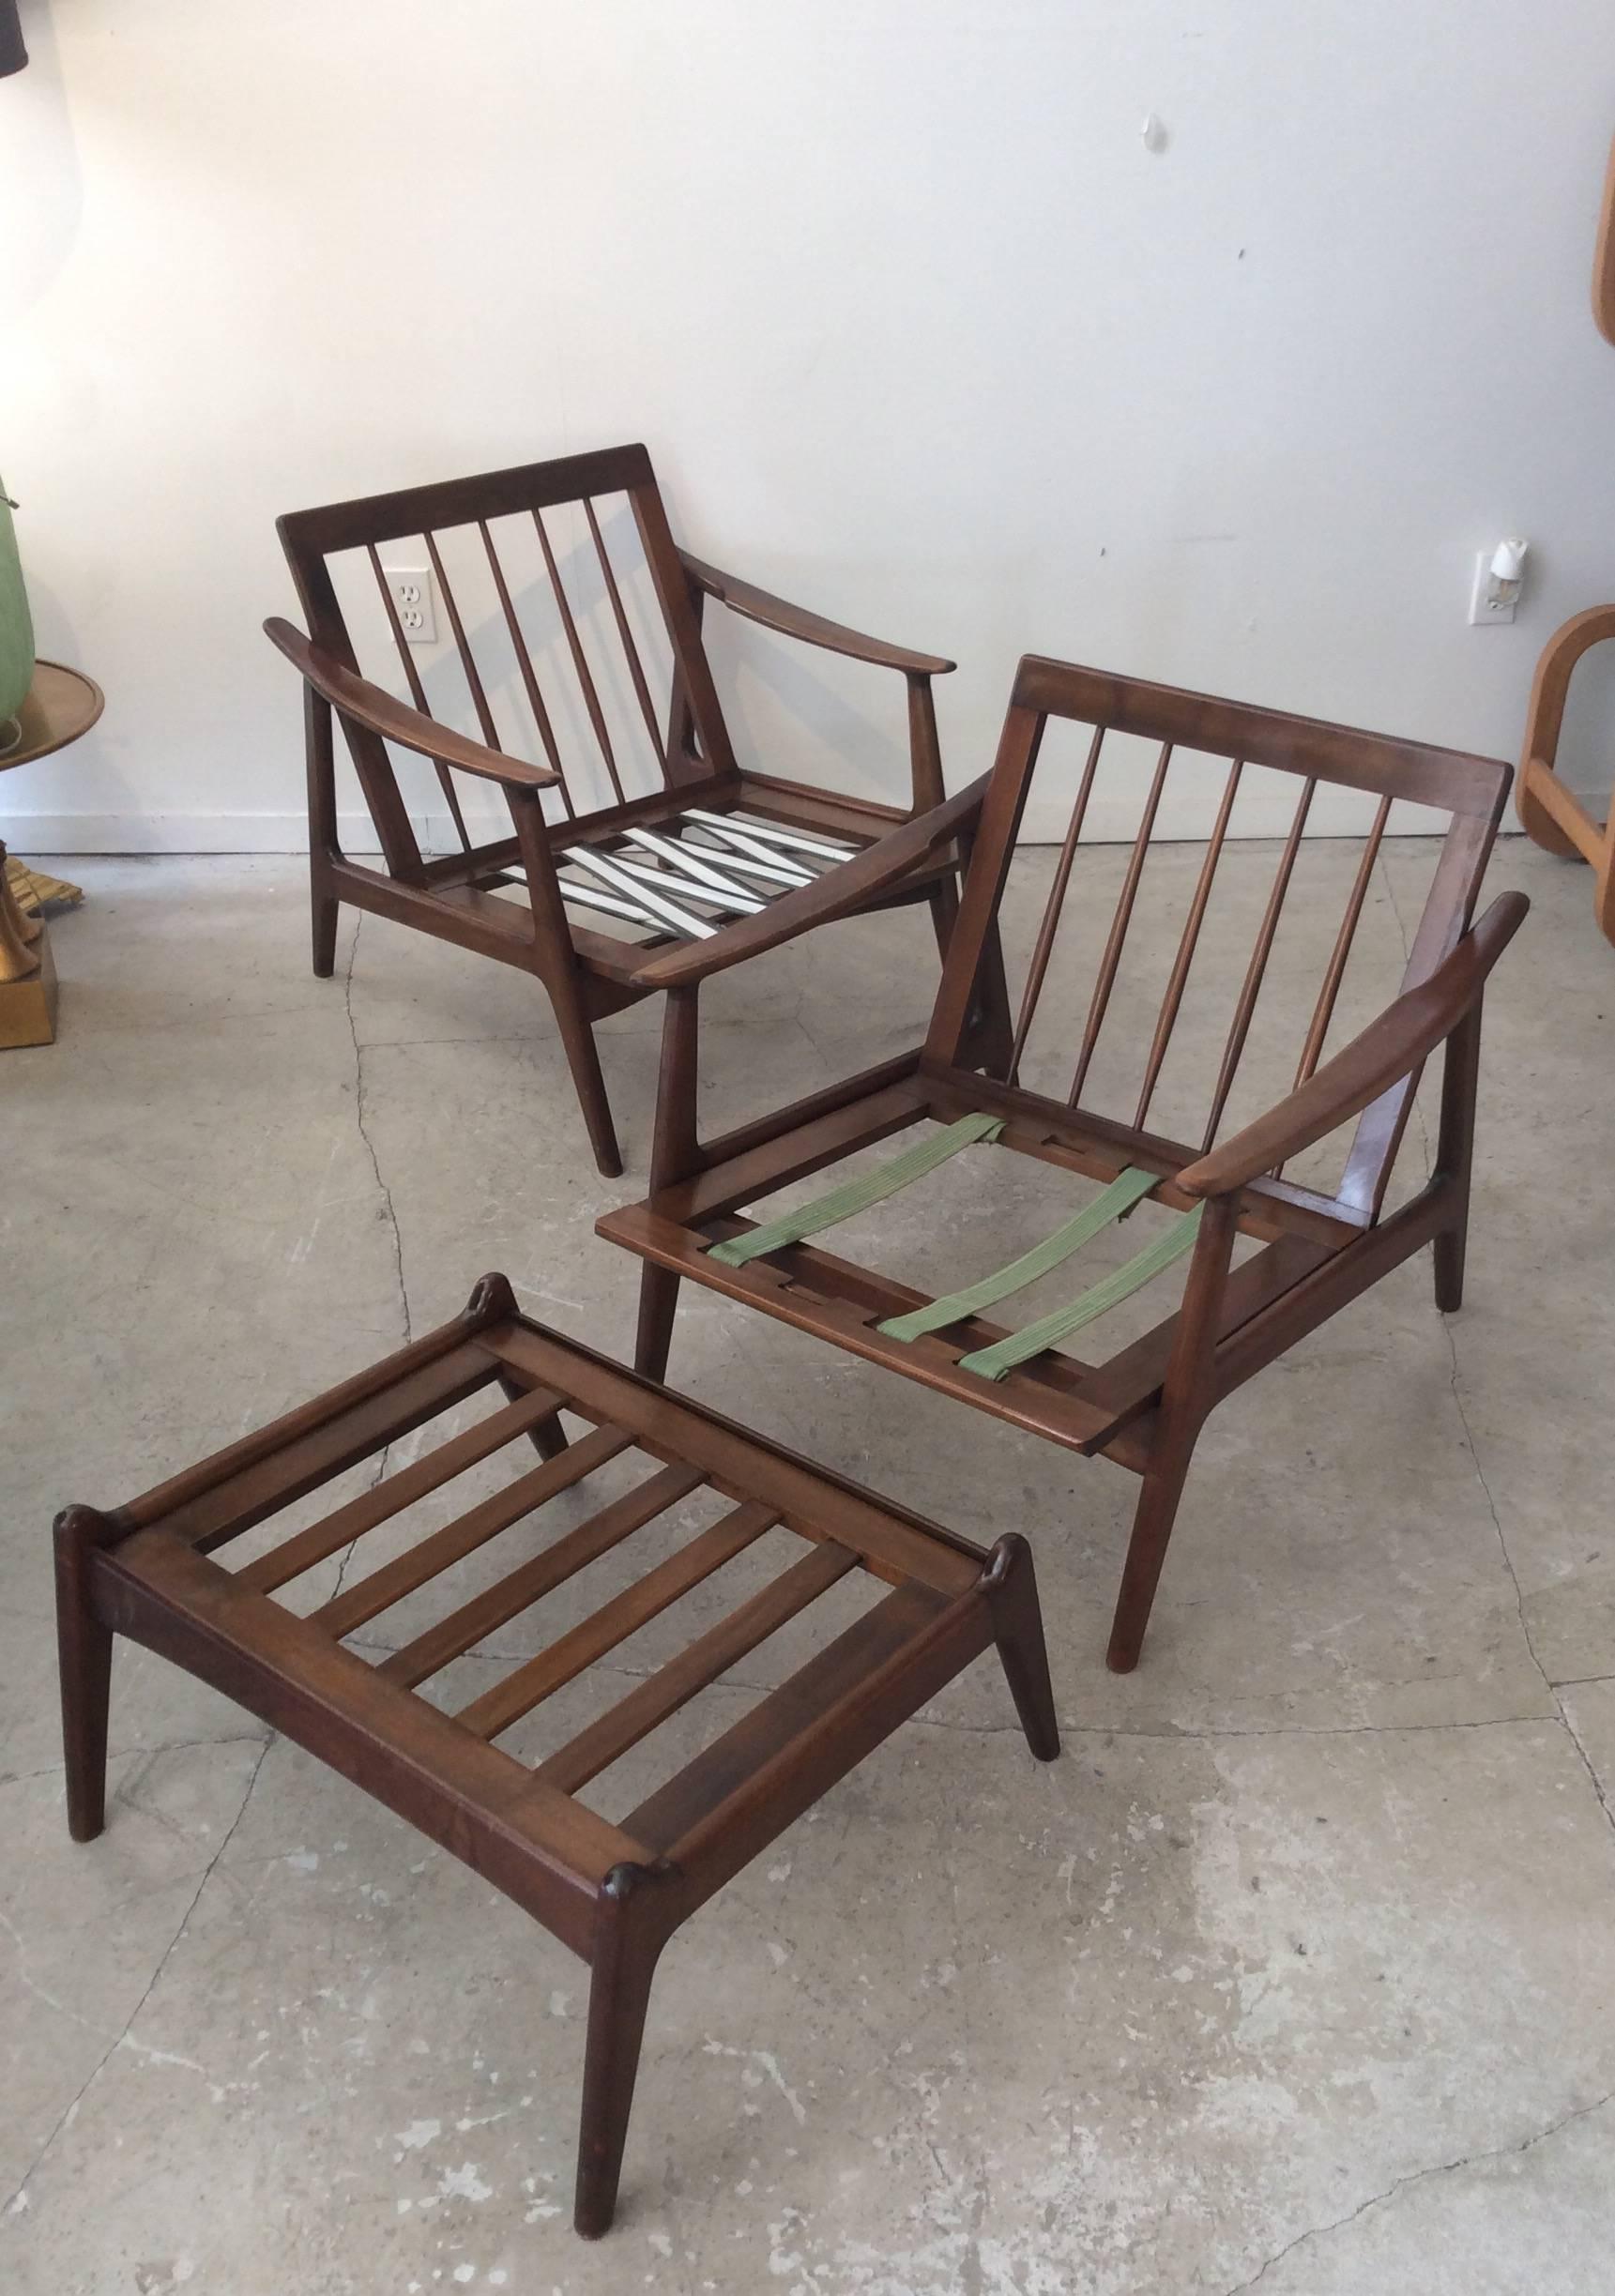 These chairs are the epitome of Danish Mid-Century style. Constructed of walnut with a rich stained finish and loose foam upholstered cushions for back and seat support. Look in the photos for the nice connections tween legs and arms. The backs have